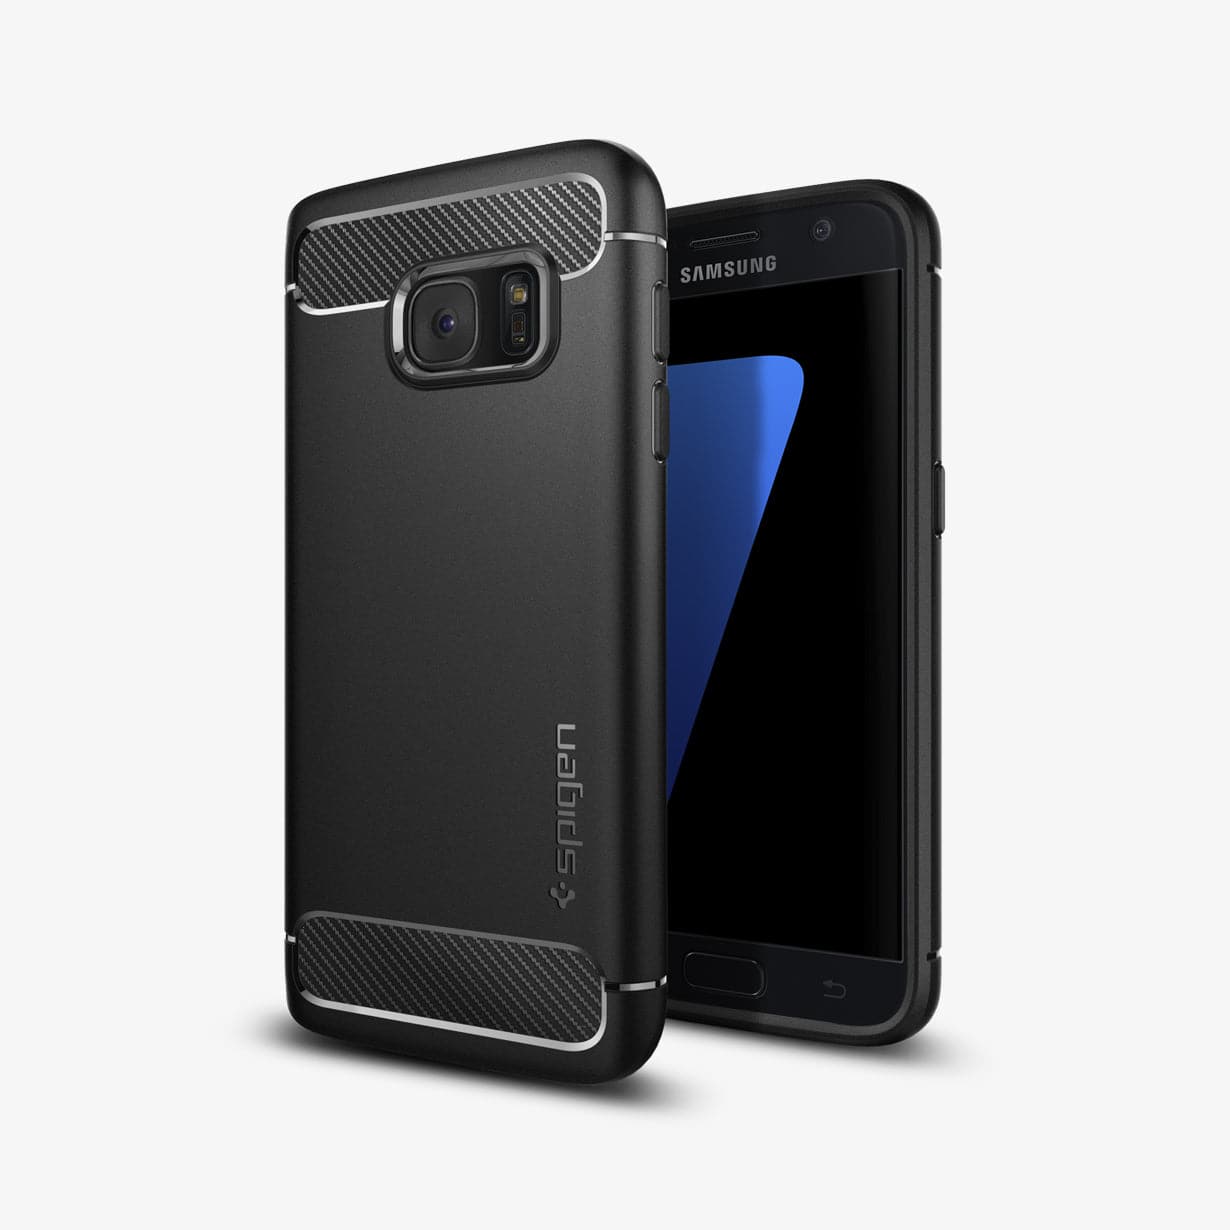 555CS20007 - Galaxy S7 Series Rugged Armor Case in black showing the back and front